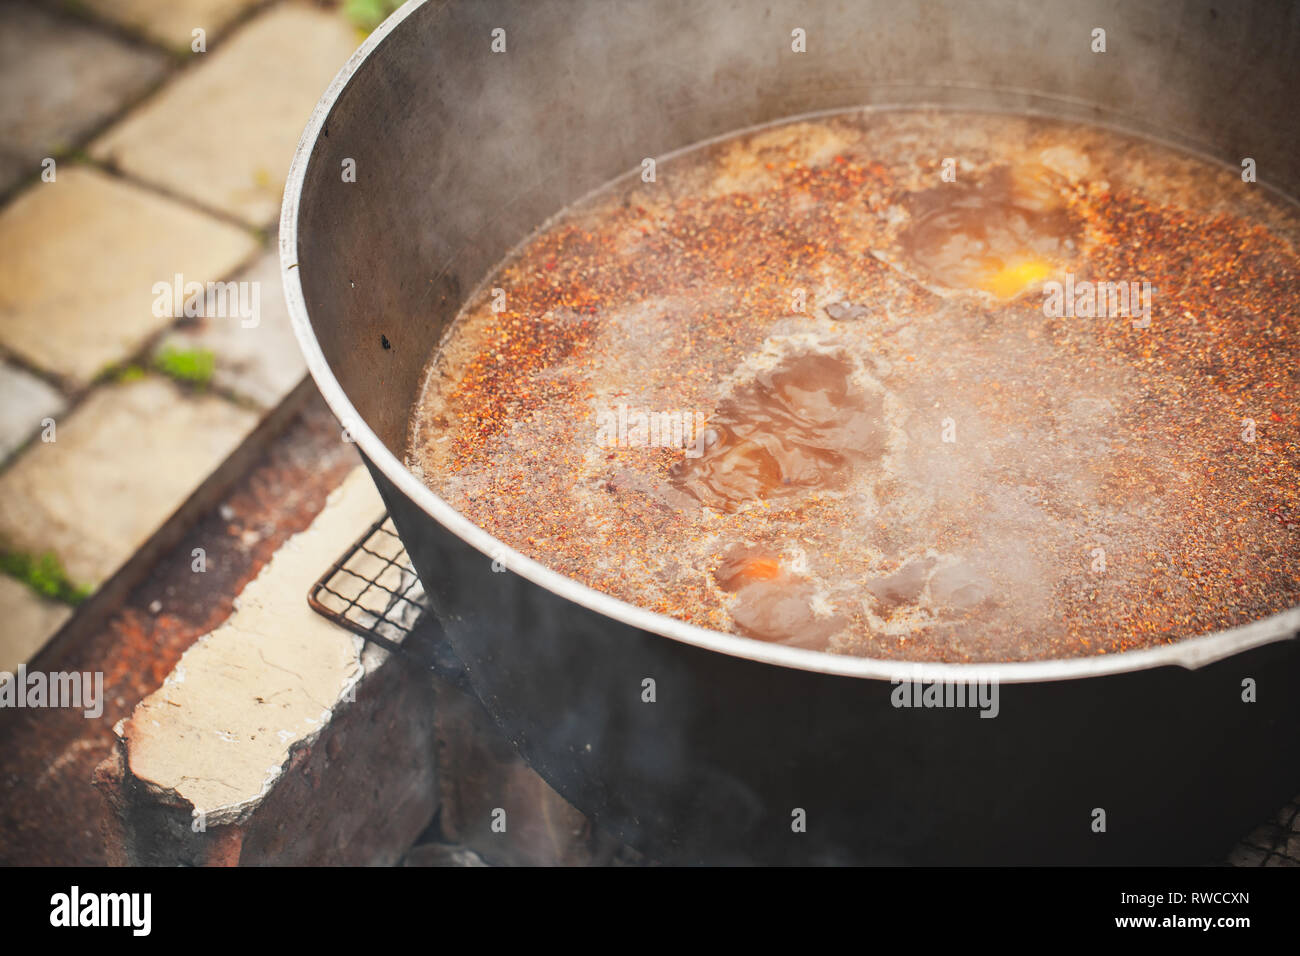 Spicy broth with lamb and vegetables boil in a cauldron. Preparing of Chorba soup on open fire, traditional meal for many national cuisines in Europe, Stock Photo